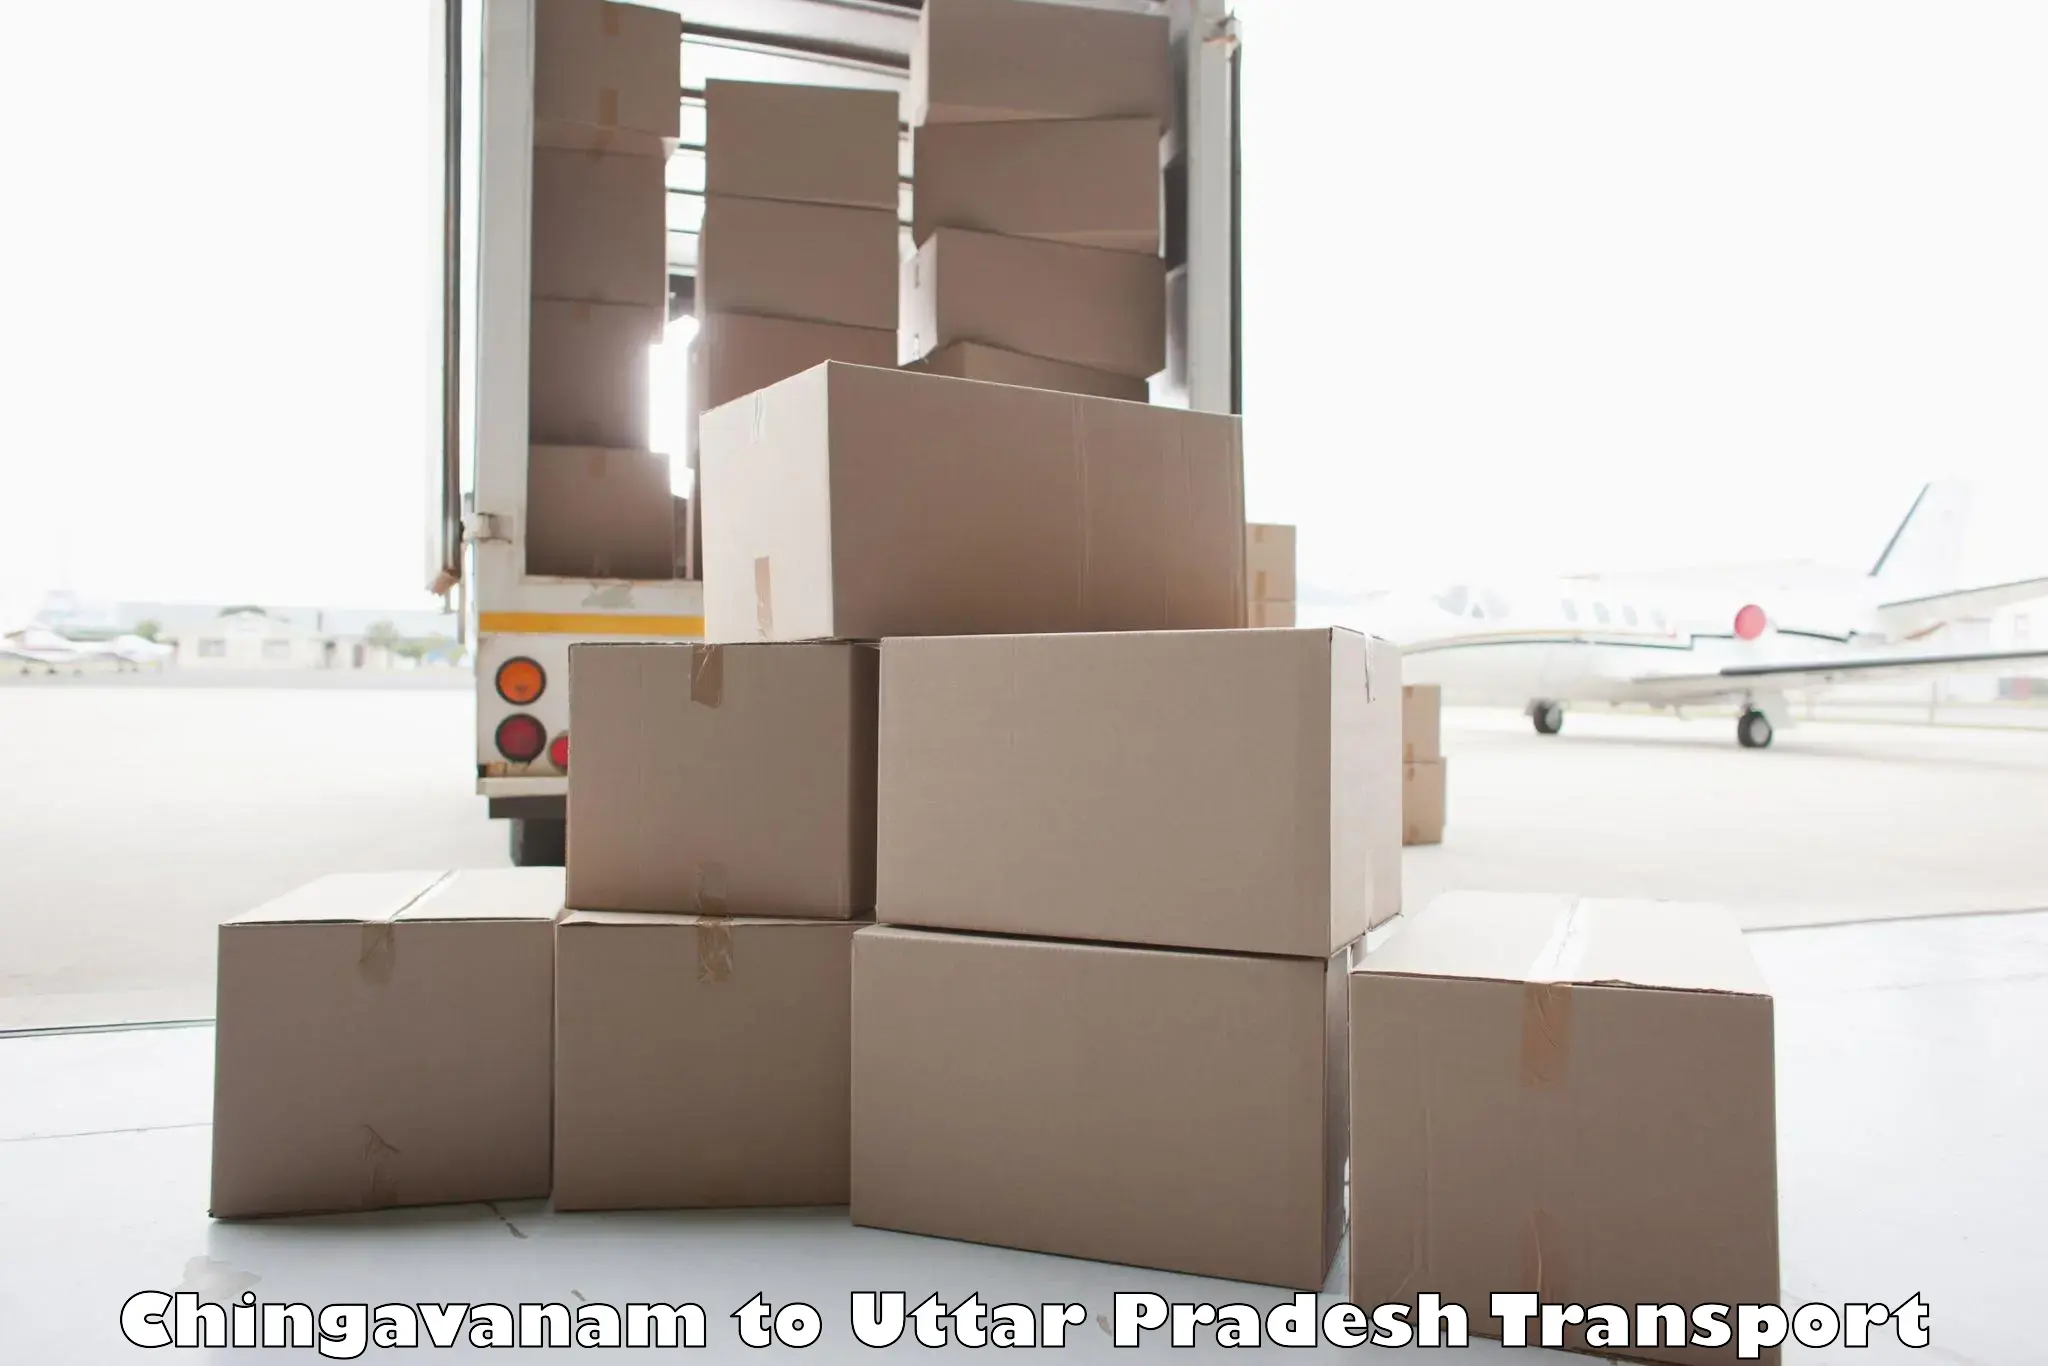 Cargo train transport services in Chingavanam to Ghaziabad